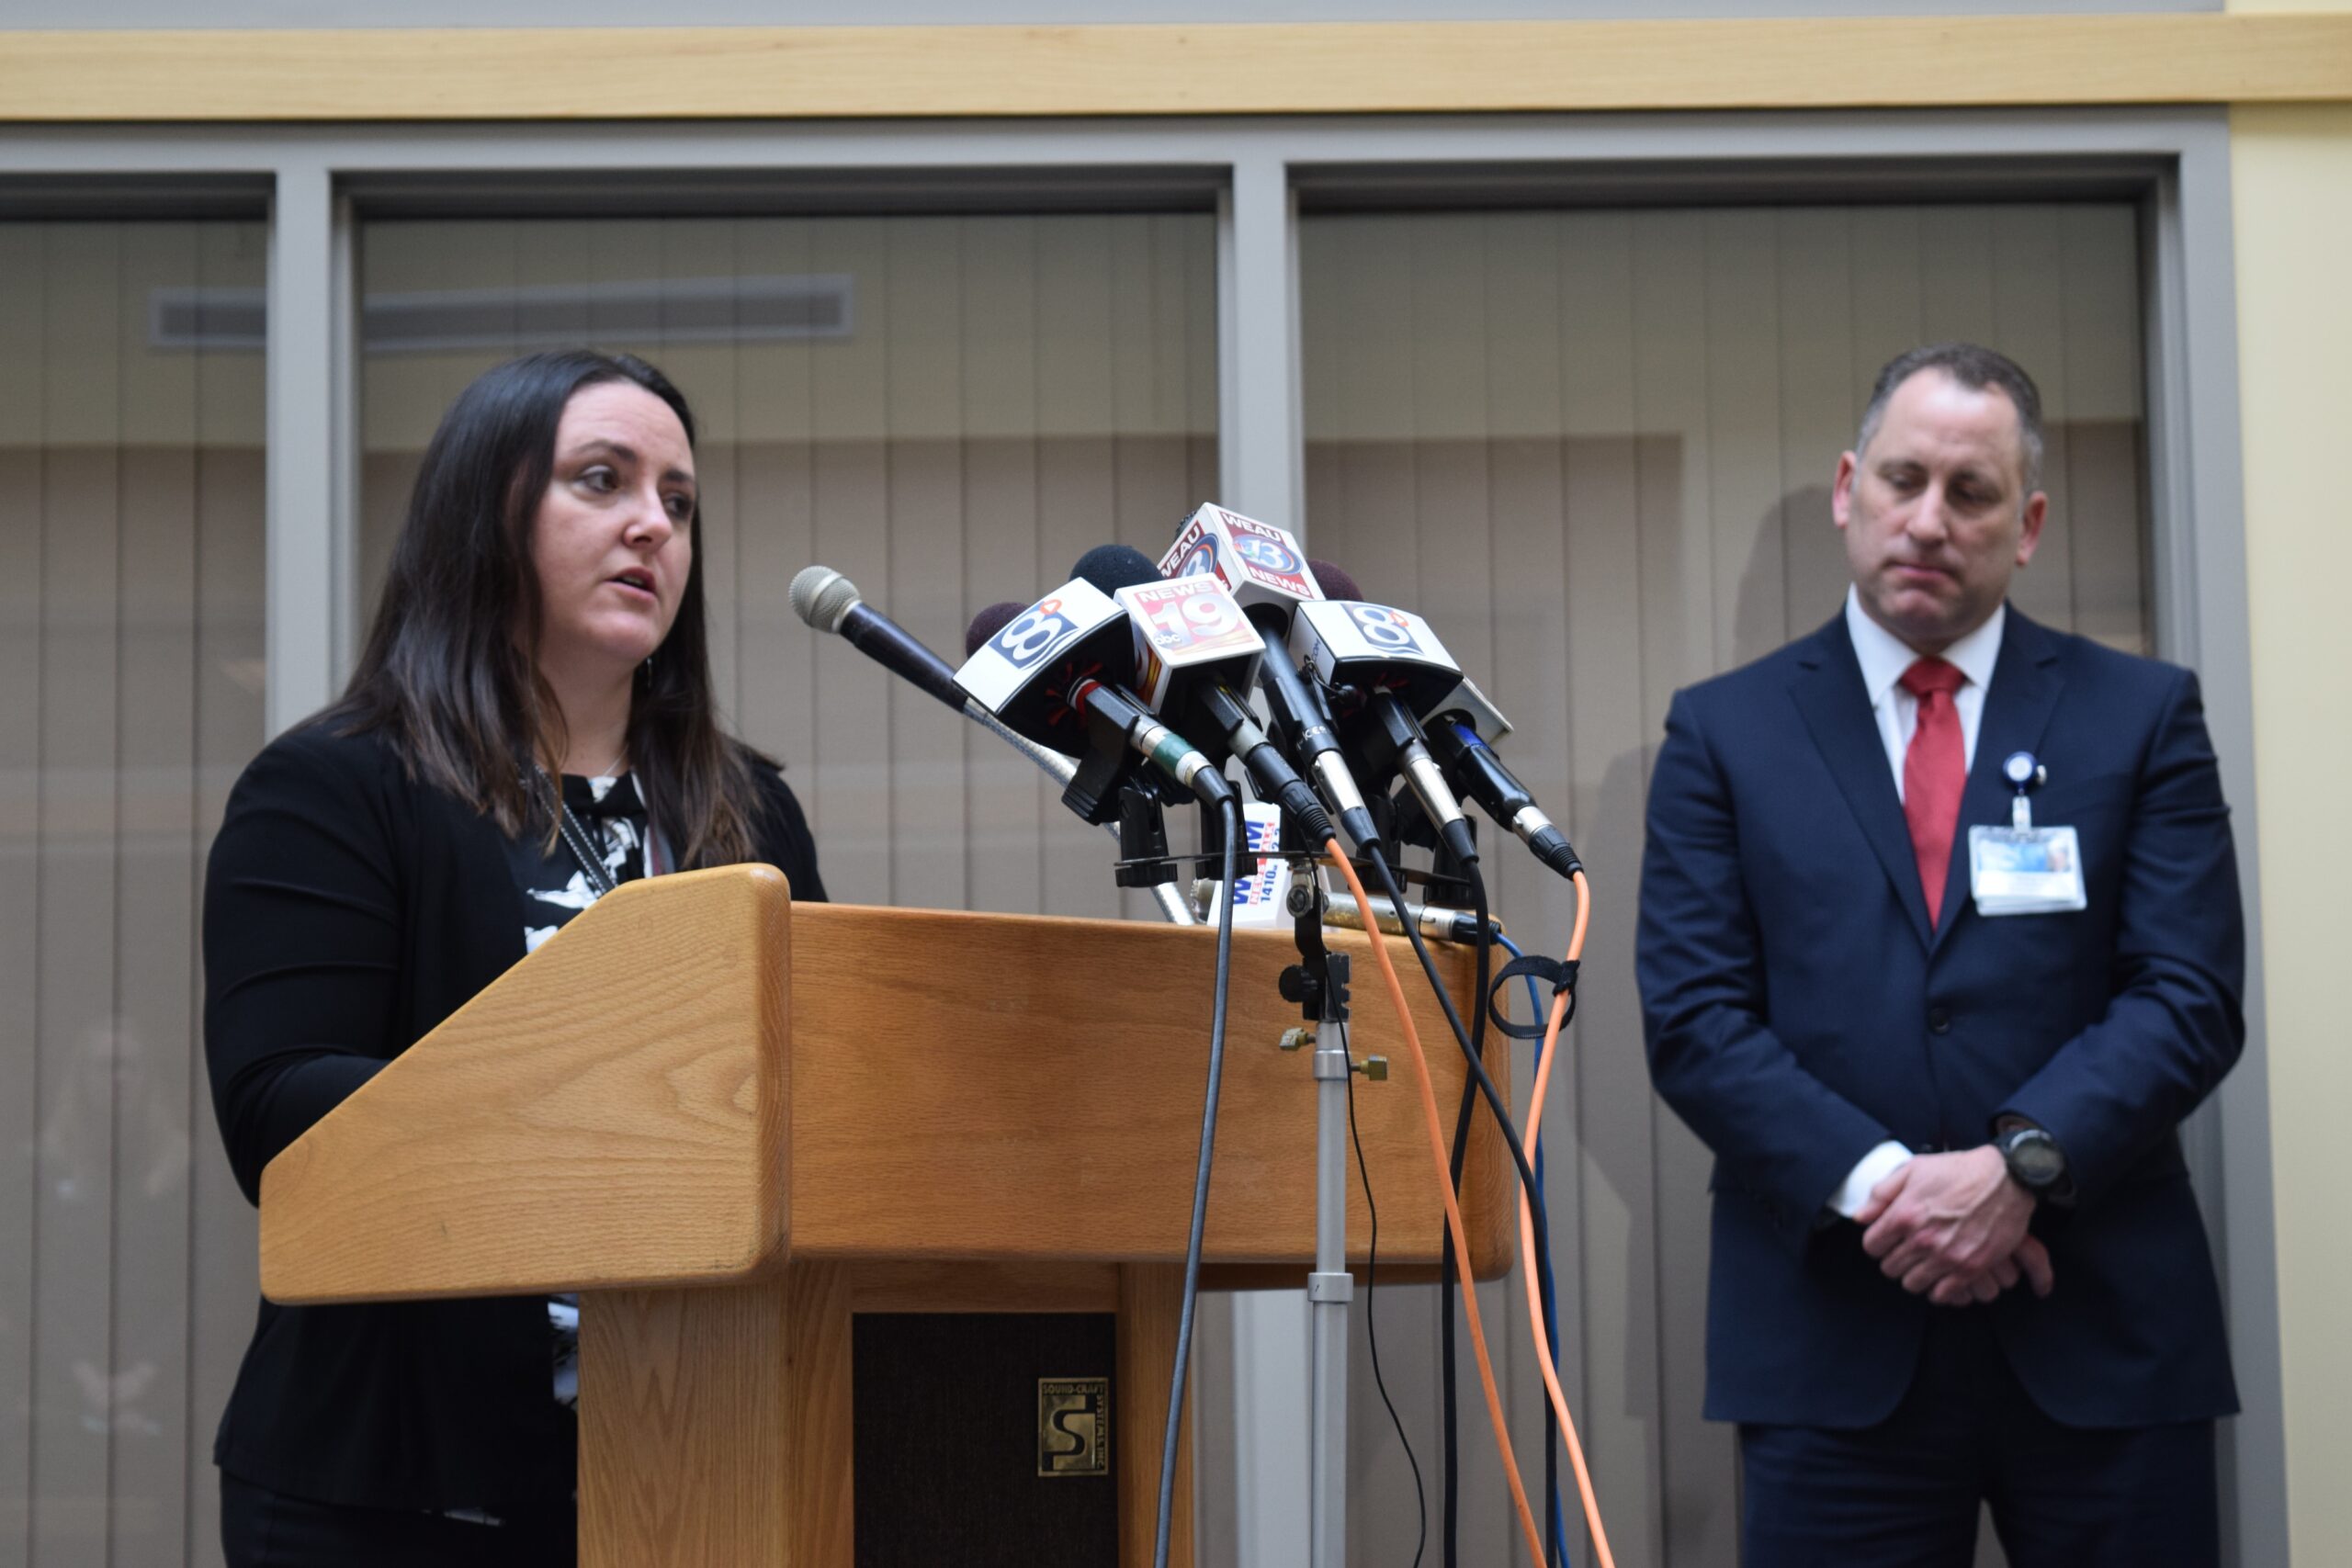 La Crosse County Health Department Director Jen Rombalski and Mayo Clinic Health System of La Crosse Dr. Paul Molling speak at a news conference on Wednesday, March 20 announcing the first positive tests for COVID-19 in La Crosse County